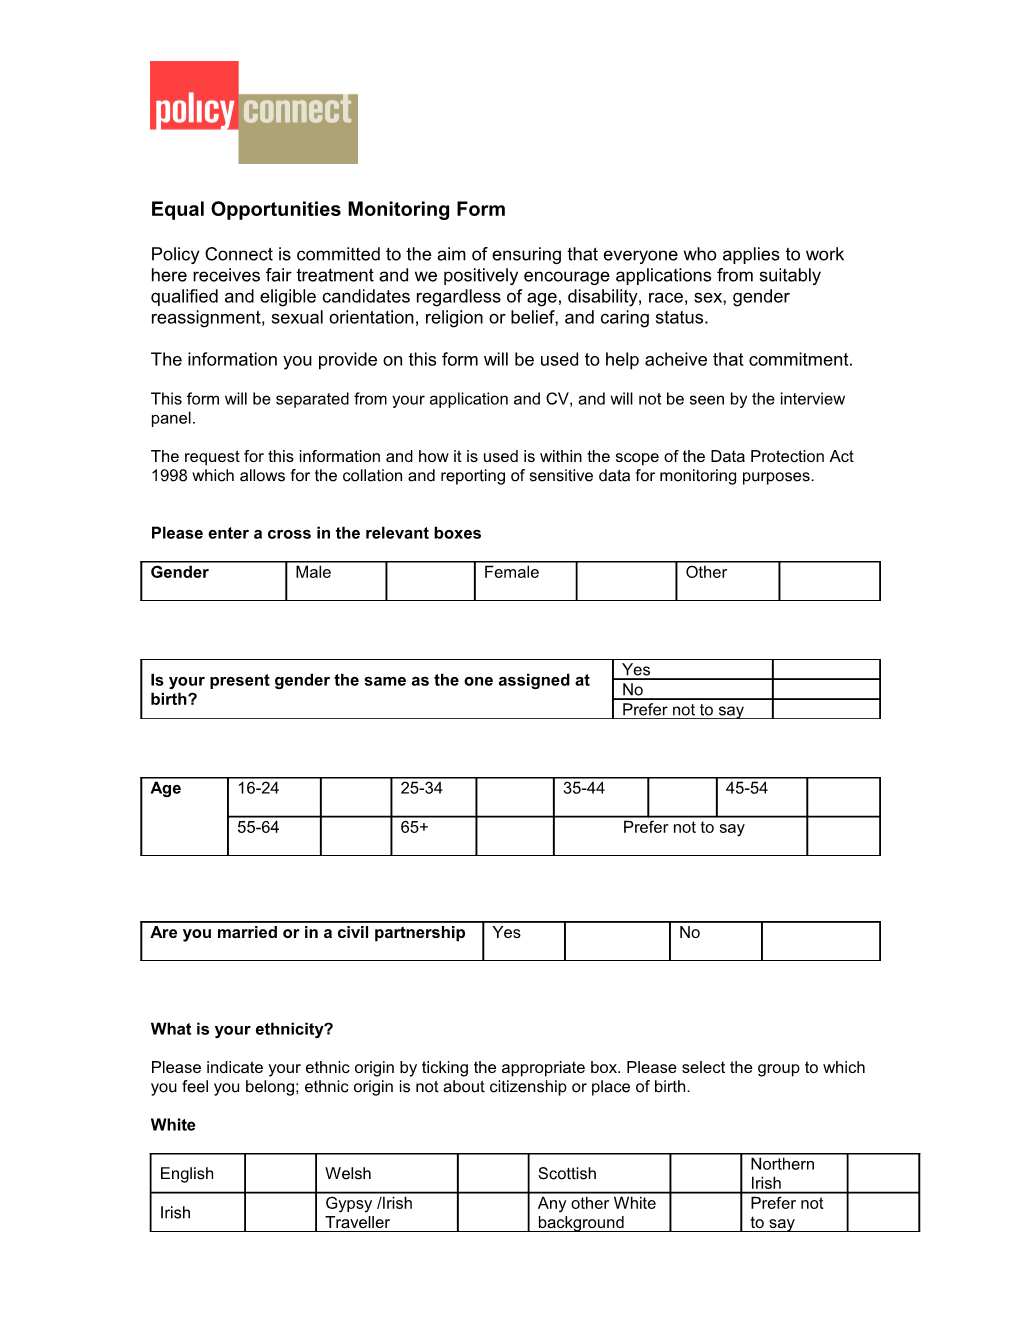 Equal Opportunities Monitoring Form s4